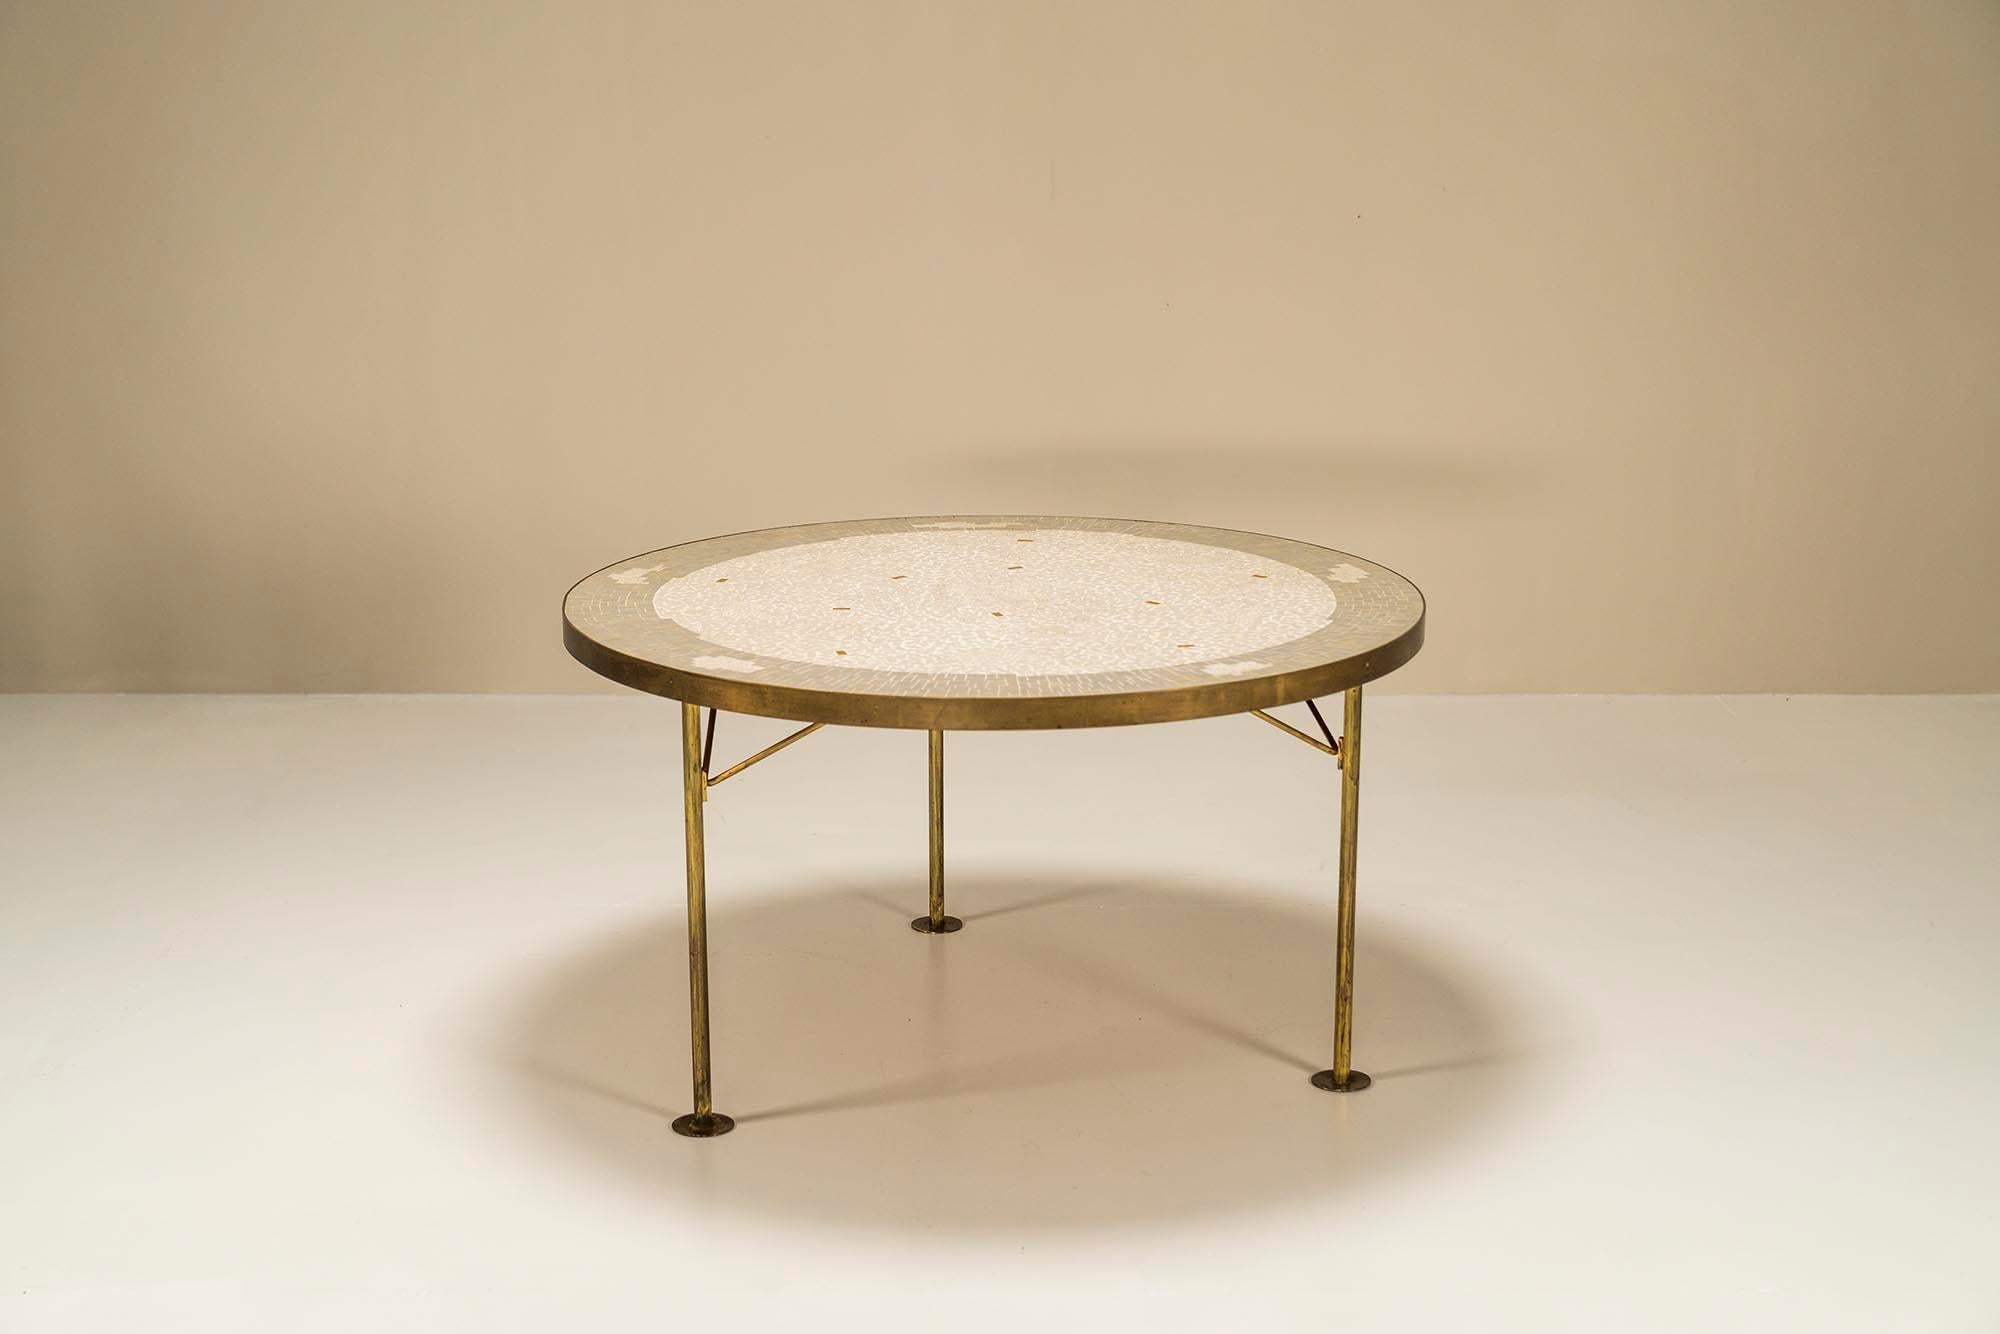 Mid-Century Modern Round Mosaic Coffee Table by Berthold Müller-Oerlinghausen, Germany, ca 1960s For Sale